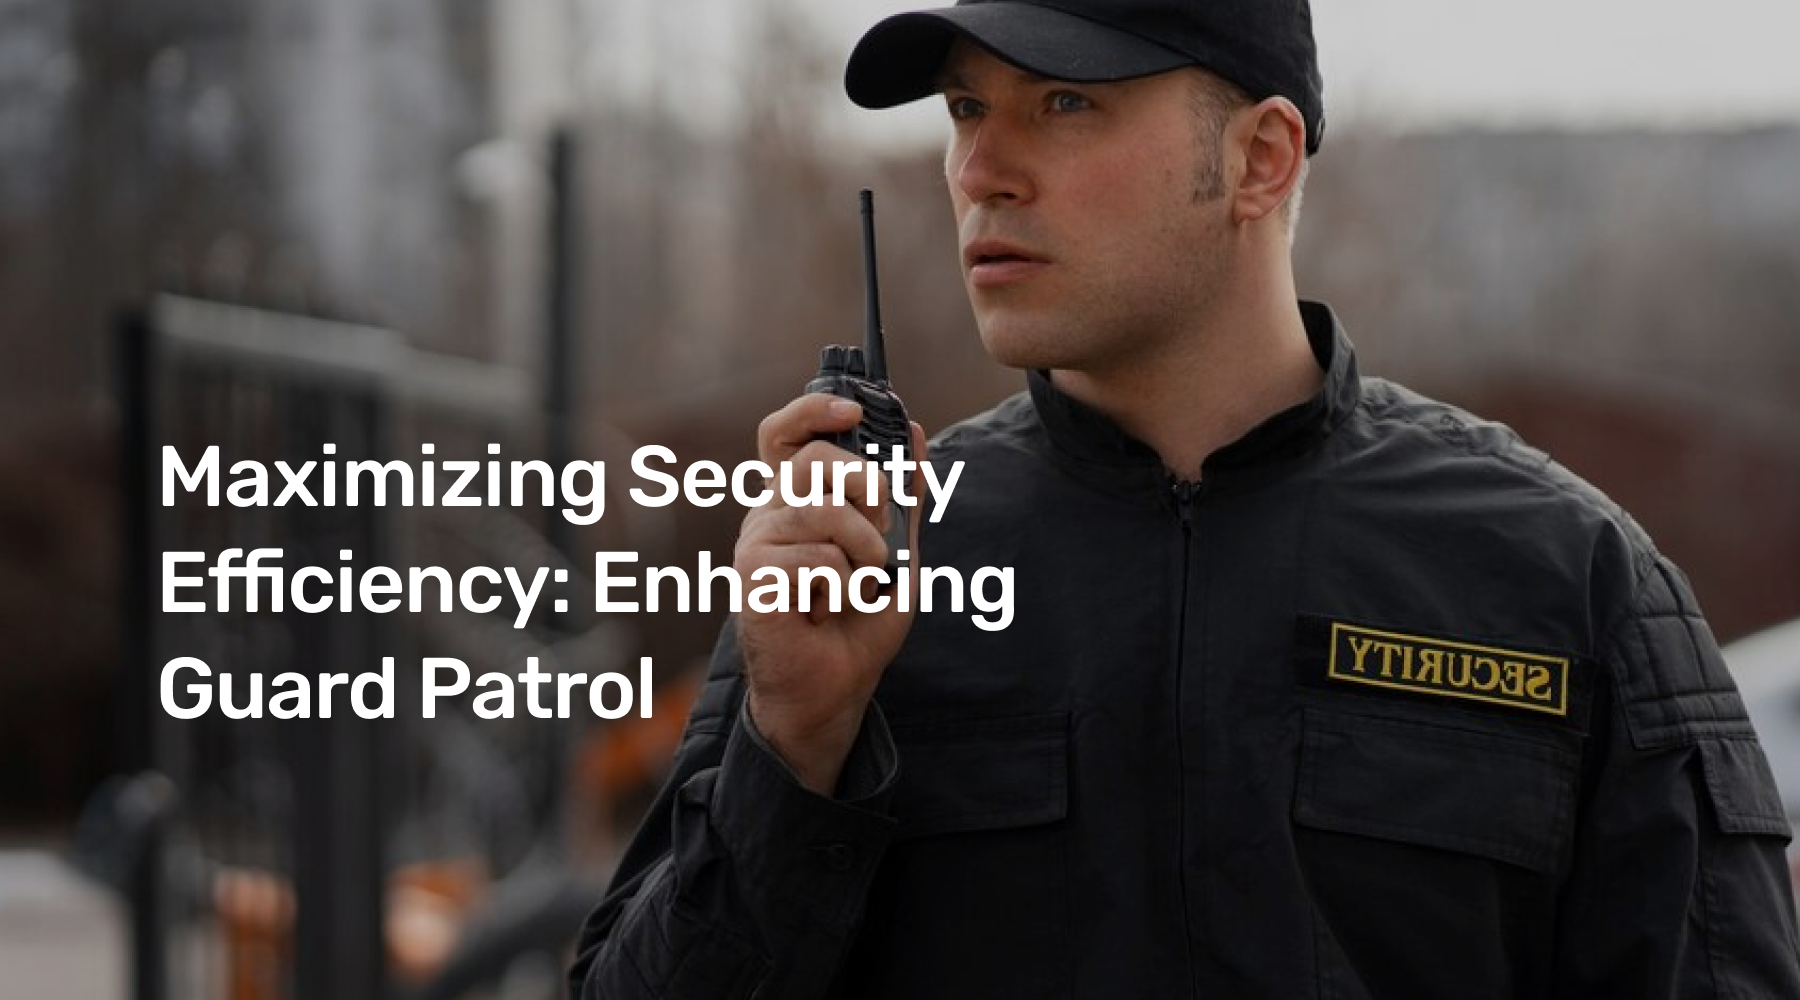 Streamlining Security and Innovations in Guard Patrol Monitoring Systems